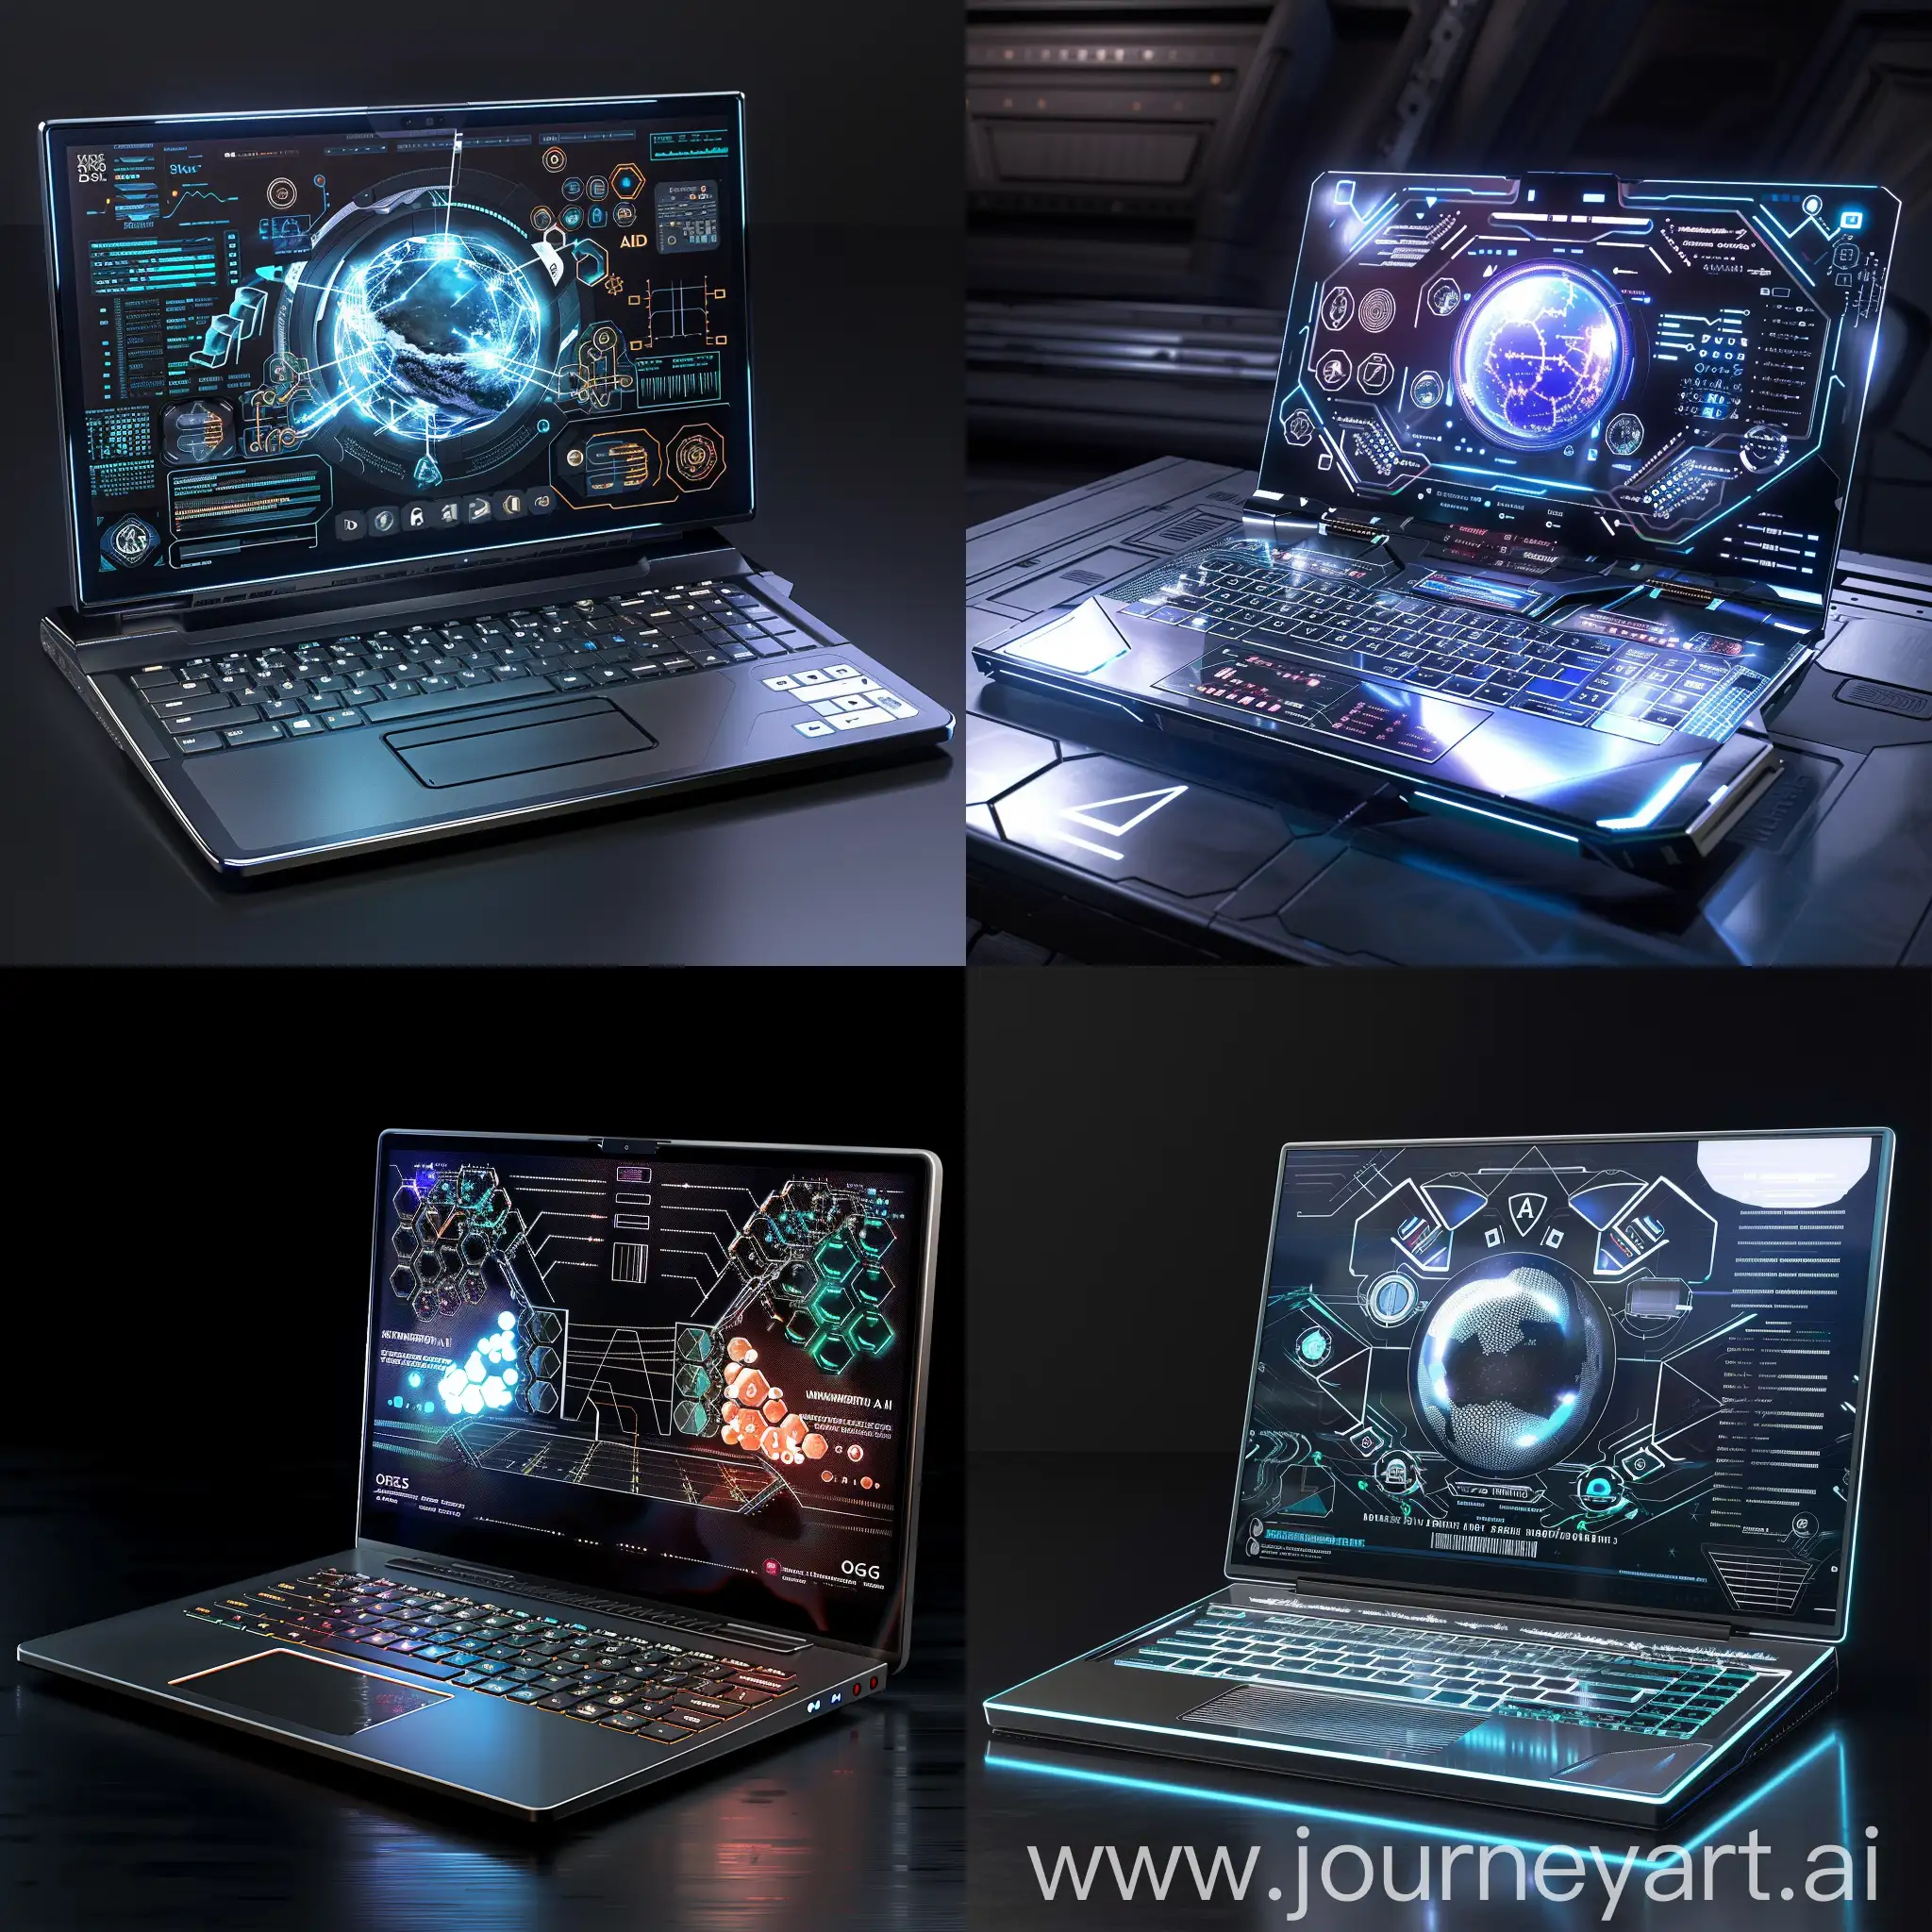 Futuristic-Laptop-with-Graphene-Batteries-and-Quantumdot-Display